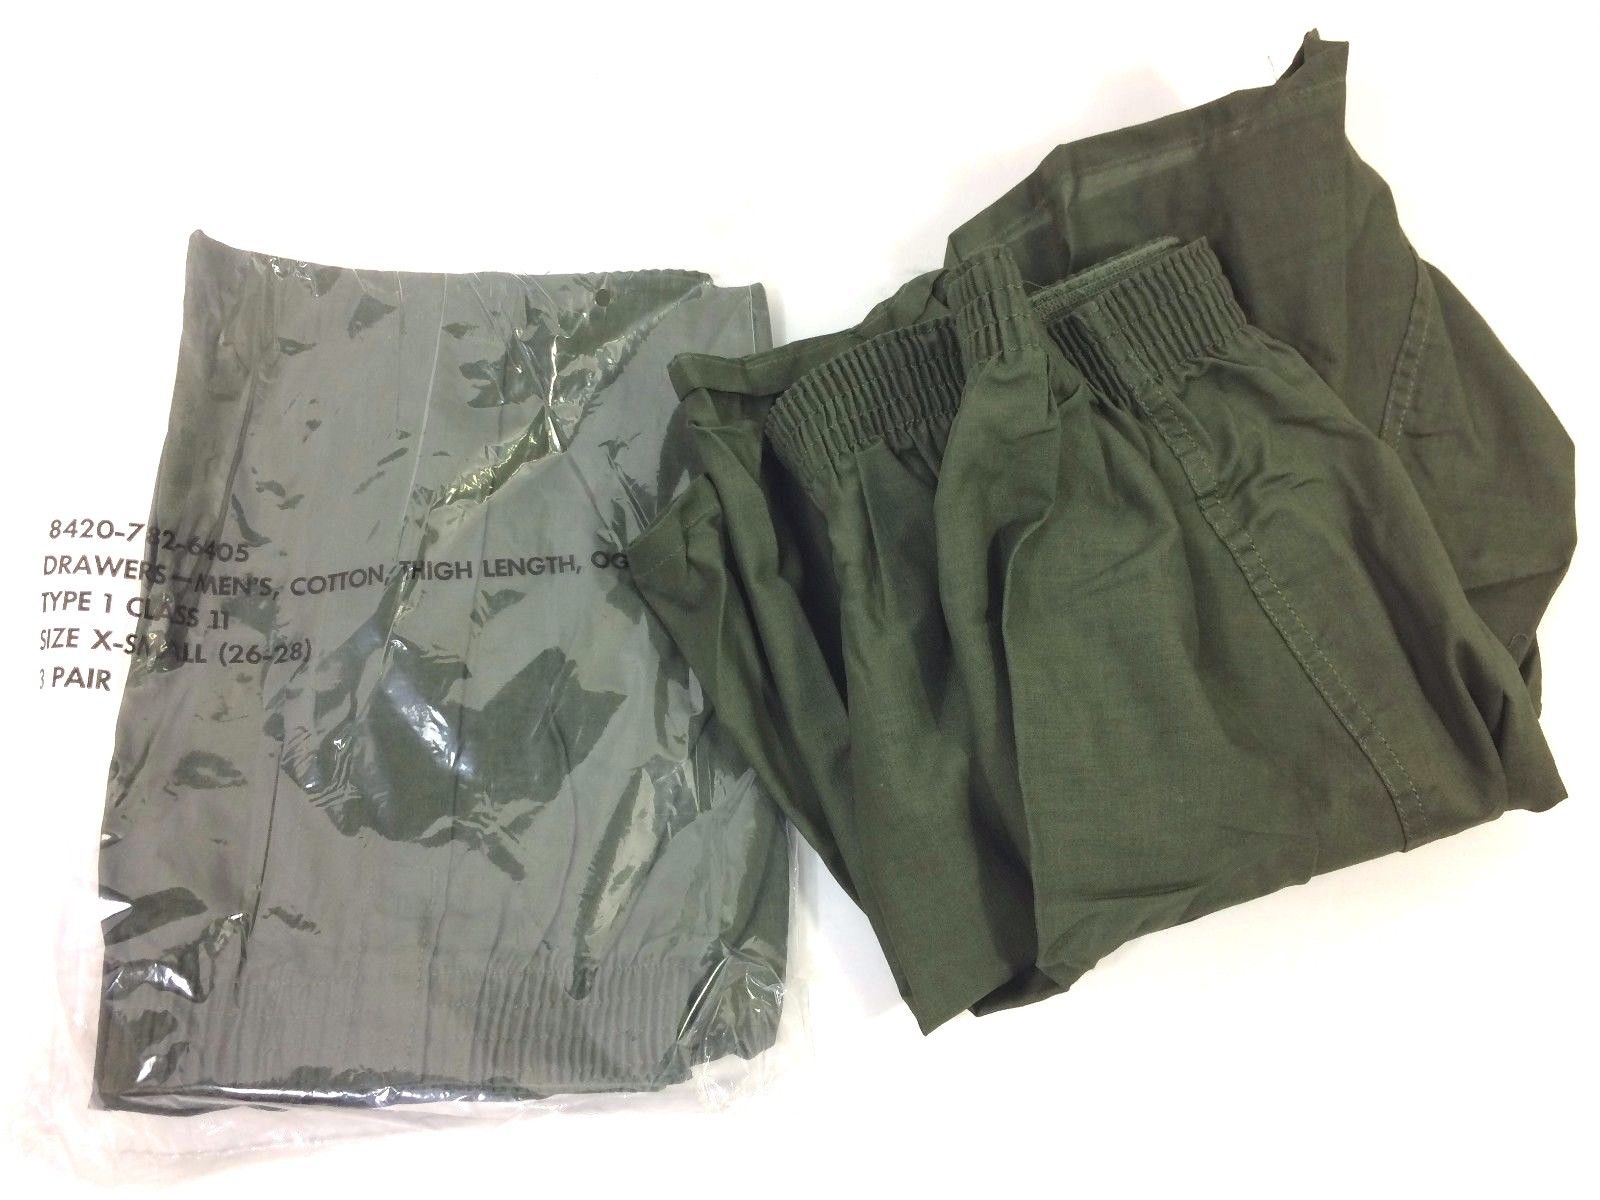 Vietnam Issue Boxer Shorts X-Small 3pair Package